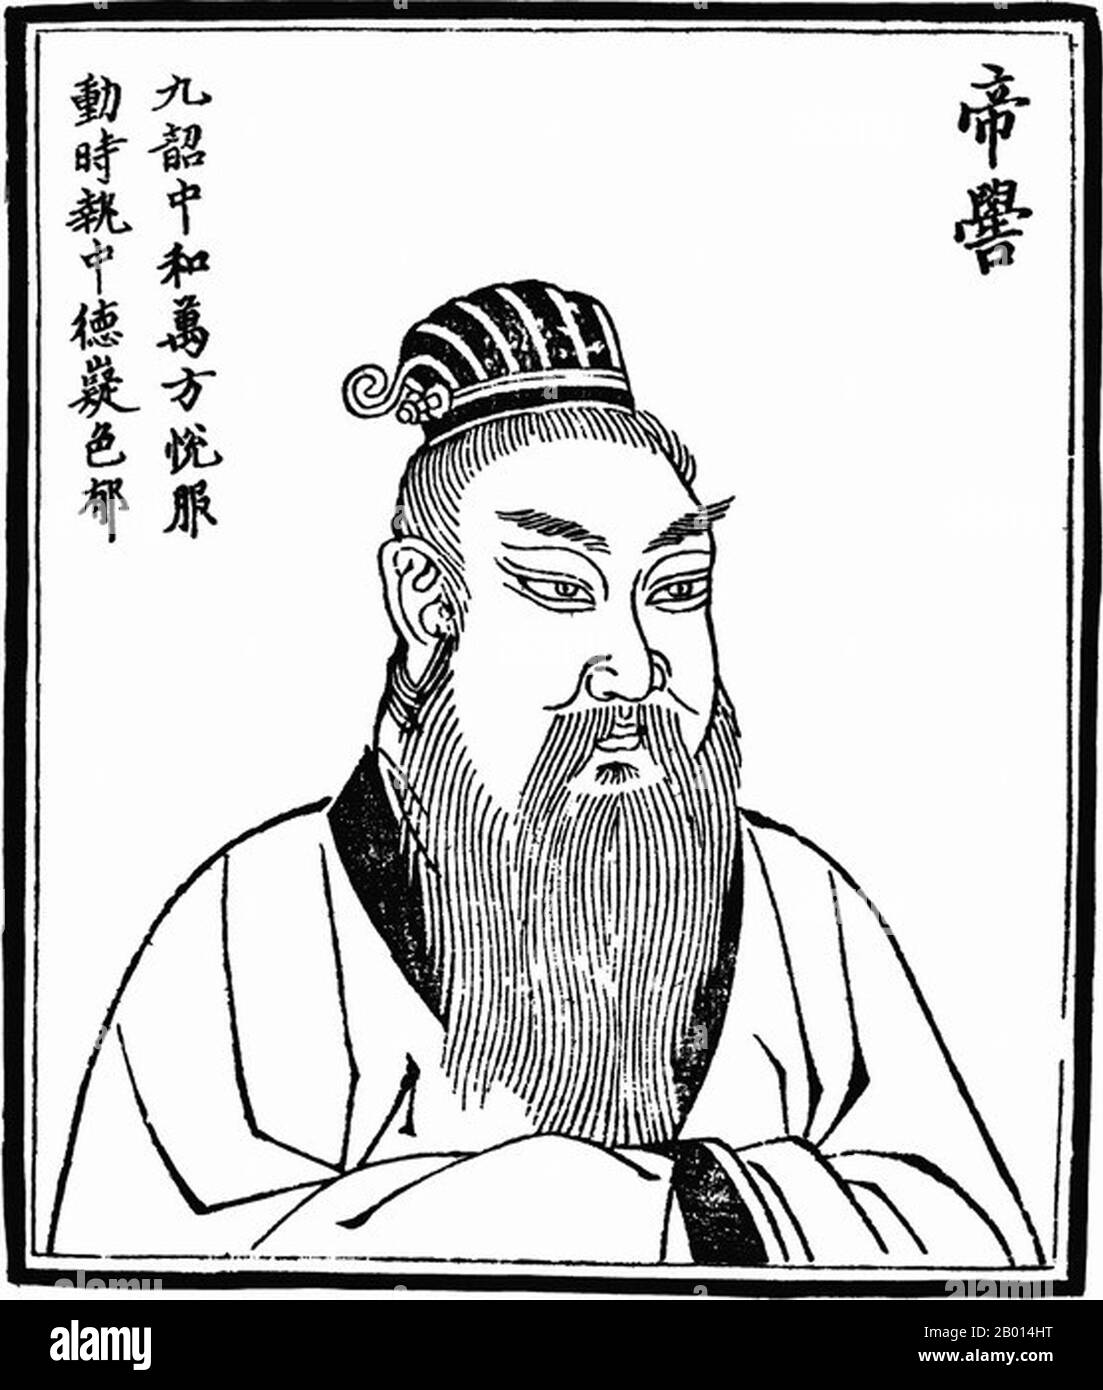 China: Emperor Ku (c. 2436-2366 BCE), third of the legendary 'Five Emperors'. Illustration, c. 1498.  Emperor Ku, also known as Di Ku, Gaoxin or Gaoxin Shi, was a legendary ruler and descendant of the Yellow Emperor. Some certain succeeding dynasties claim ancestral ties to him, though whether he is a semi-historical or fantastical figure is debated. He titled himself 'God-emperor' when he ascended, and was said to have travelled seasonally by riding a dragon in spring and summer, and a horse in autumn and winter. He was also said to have invented several musical instruments and songs. Stock Photo